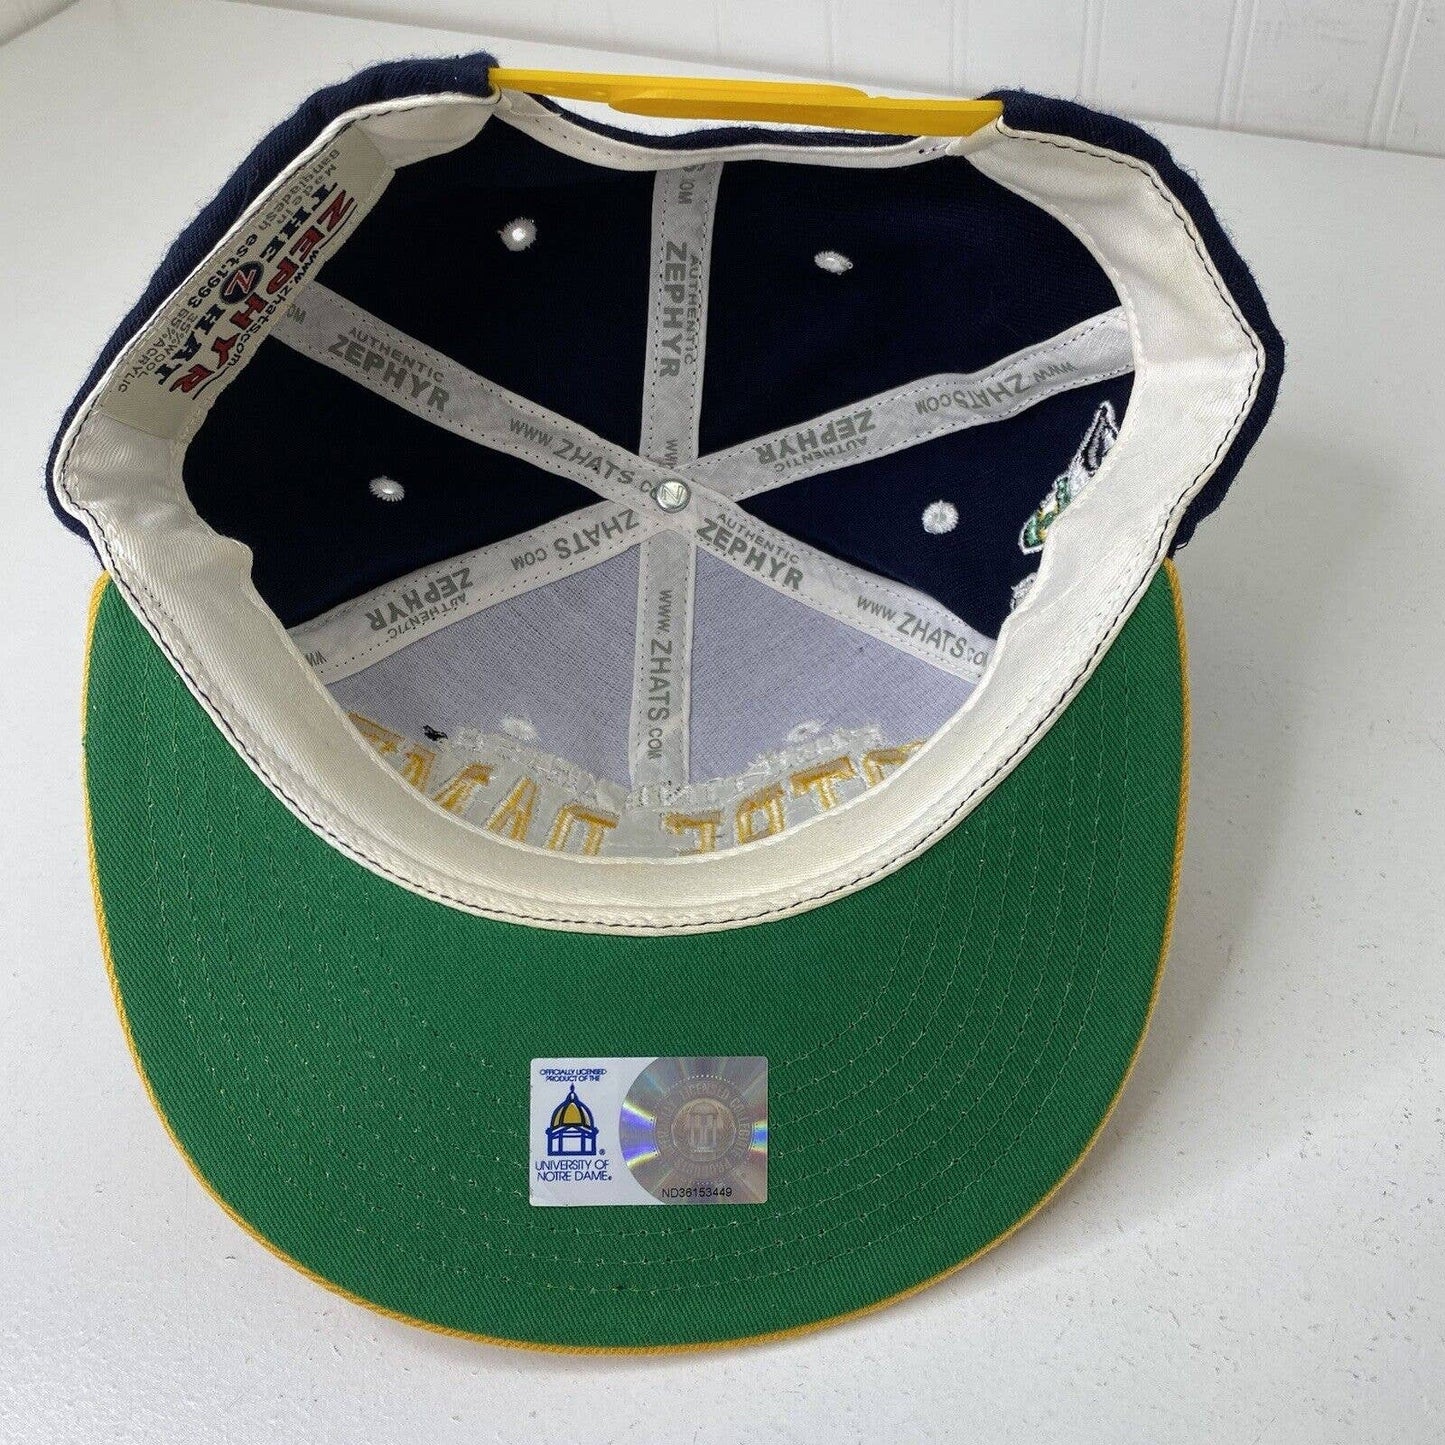 Notre Dame Zephyr The Z Hat Fighting Irish Embroidered Snapback Spelled Out